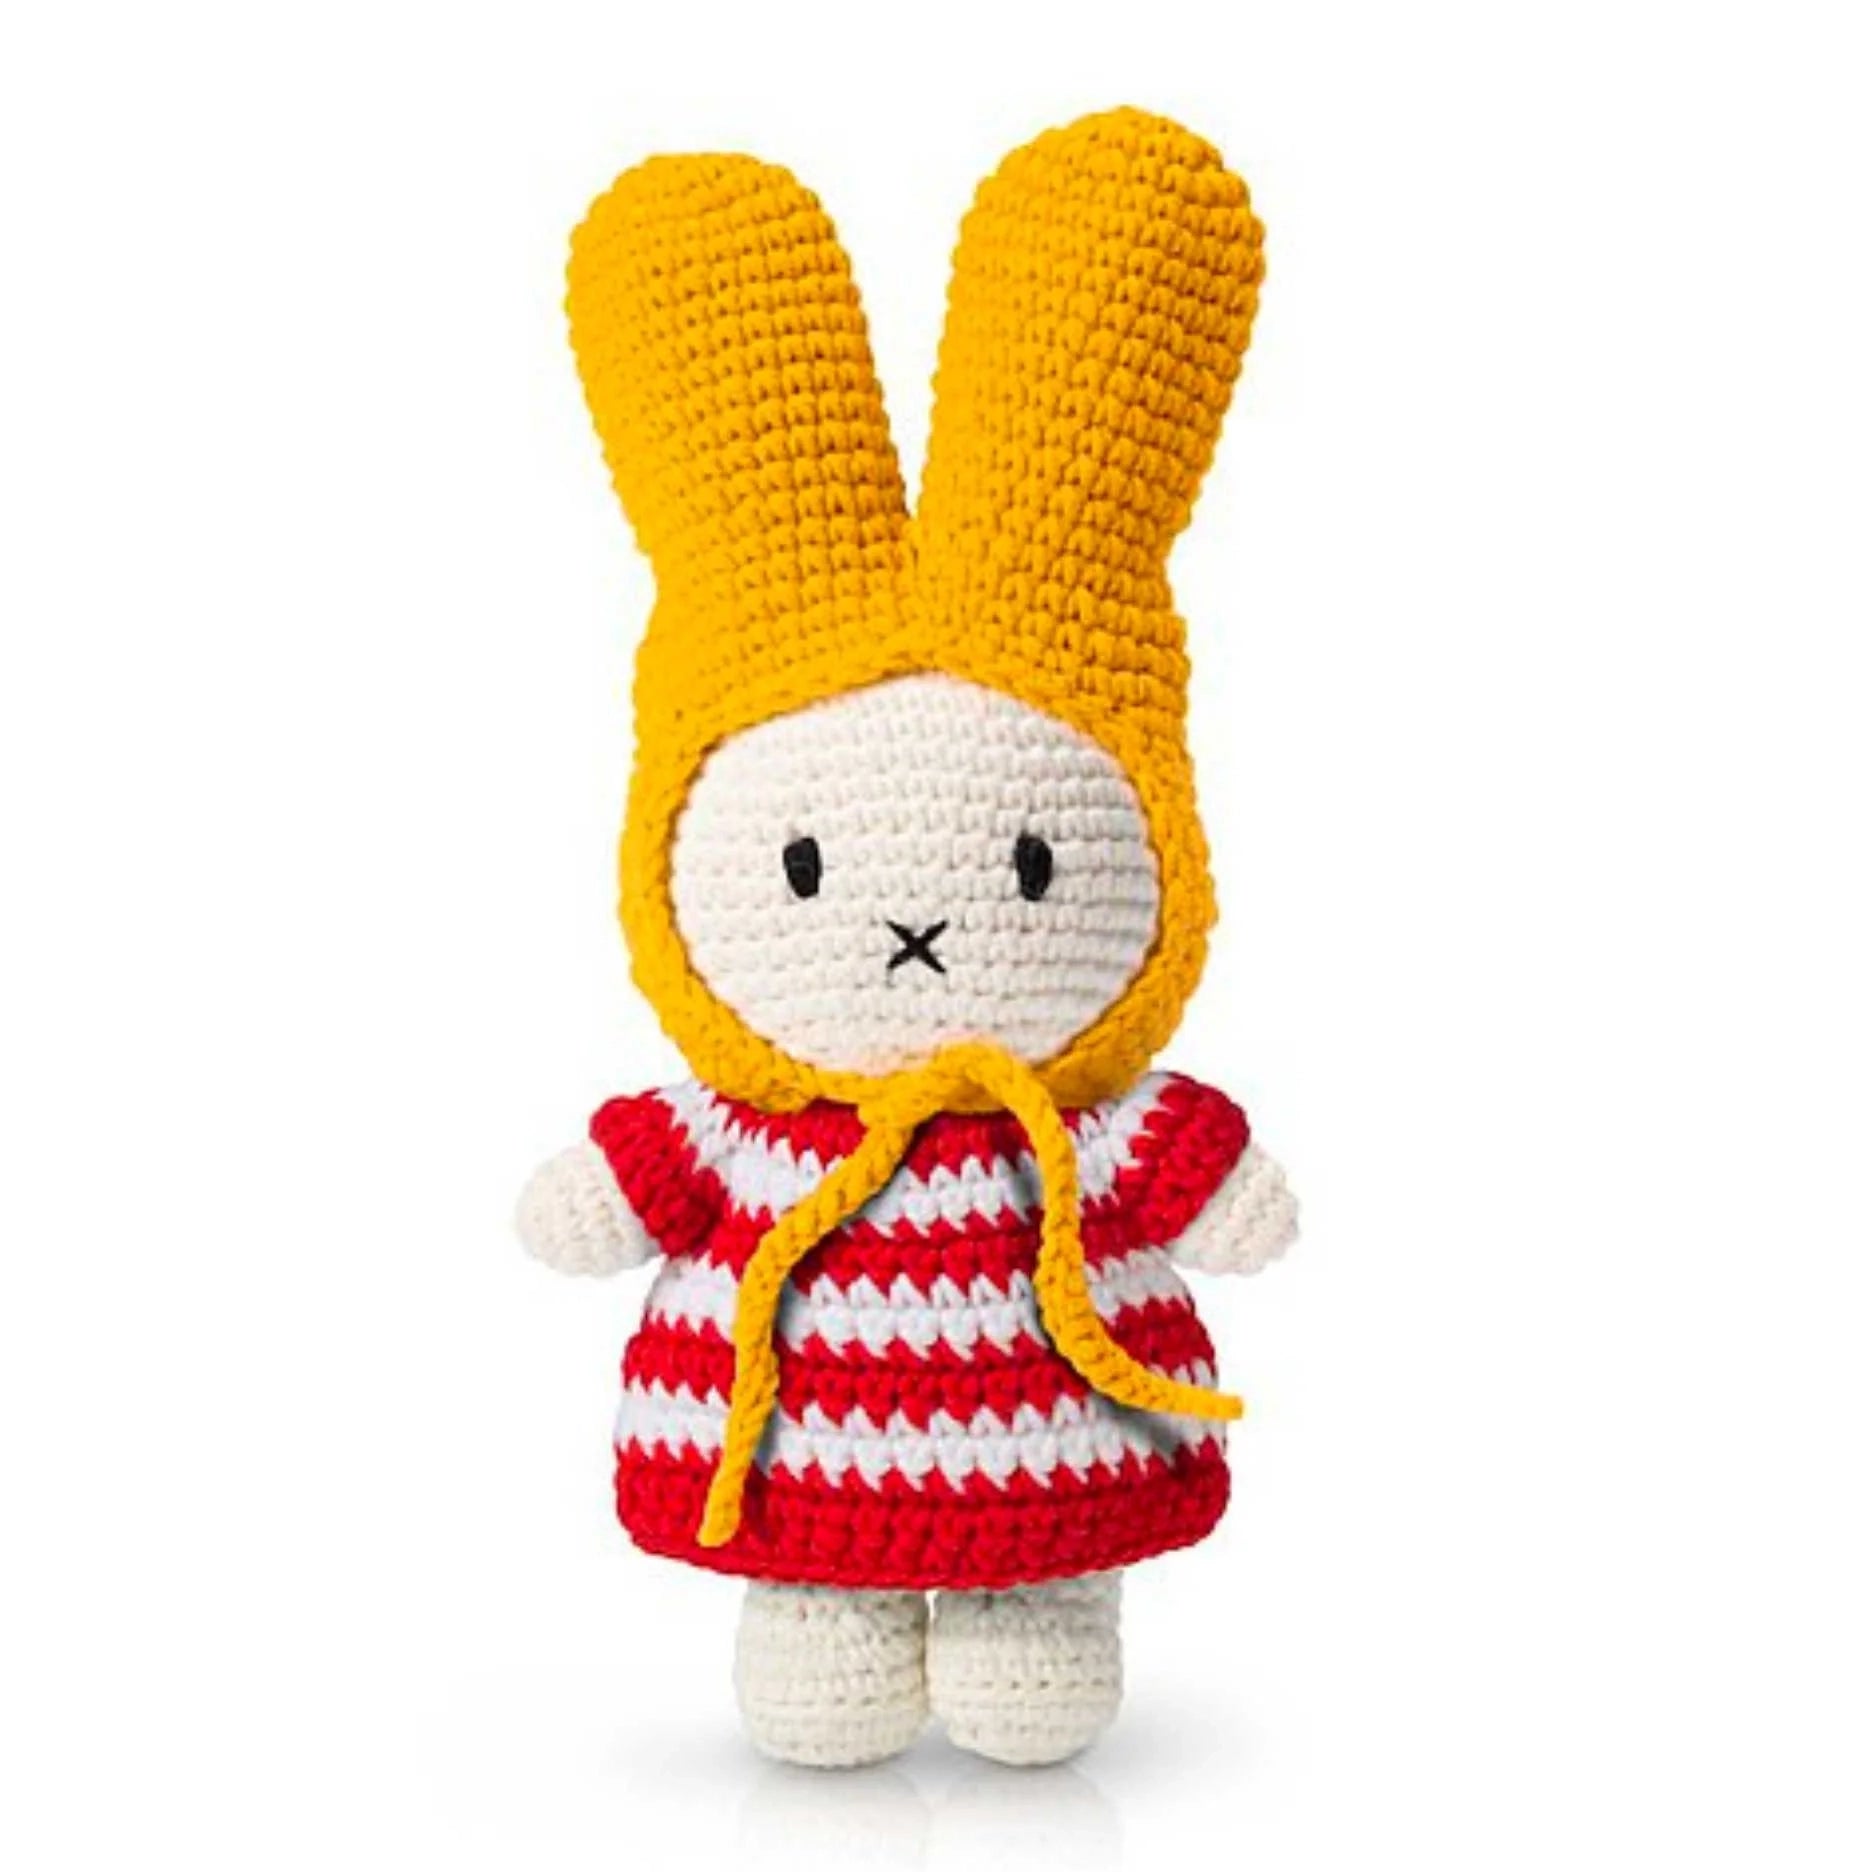 Handmade Miffy - Red striped dress and yellow hat